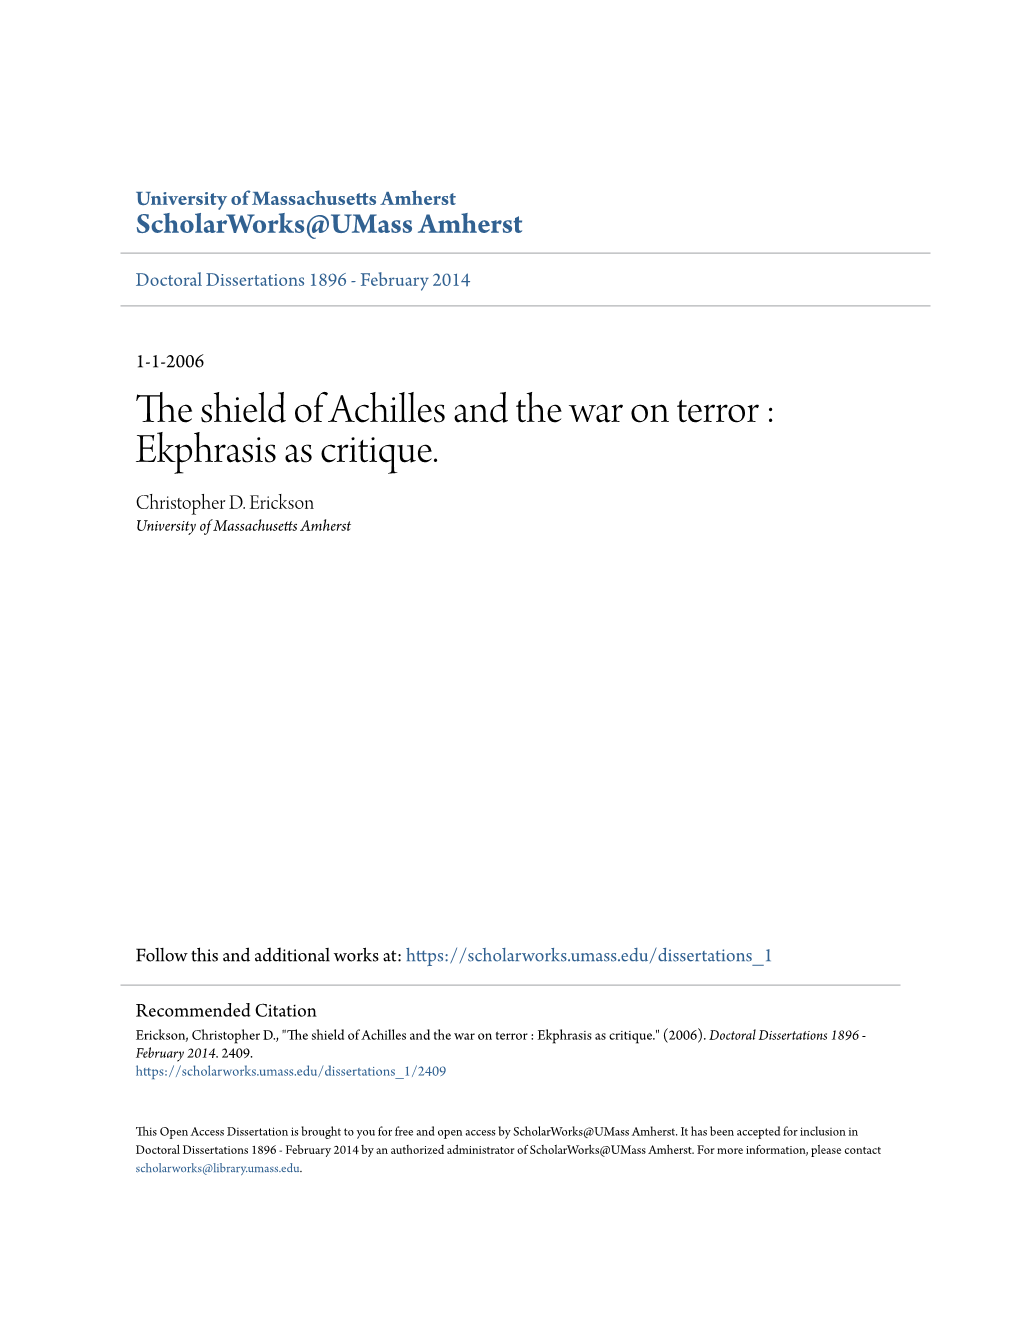 The Shield of Achilles and the War on Terror : Ekphrasis As Critique